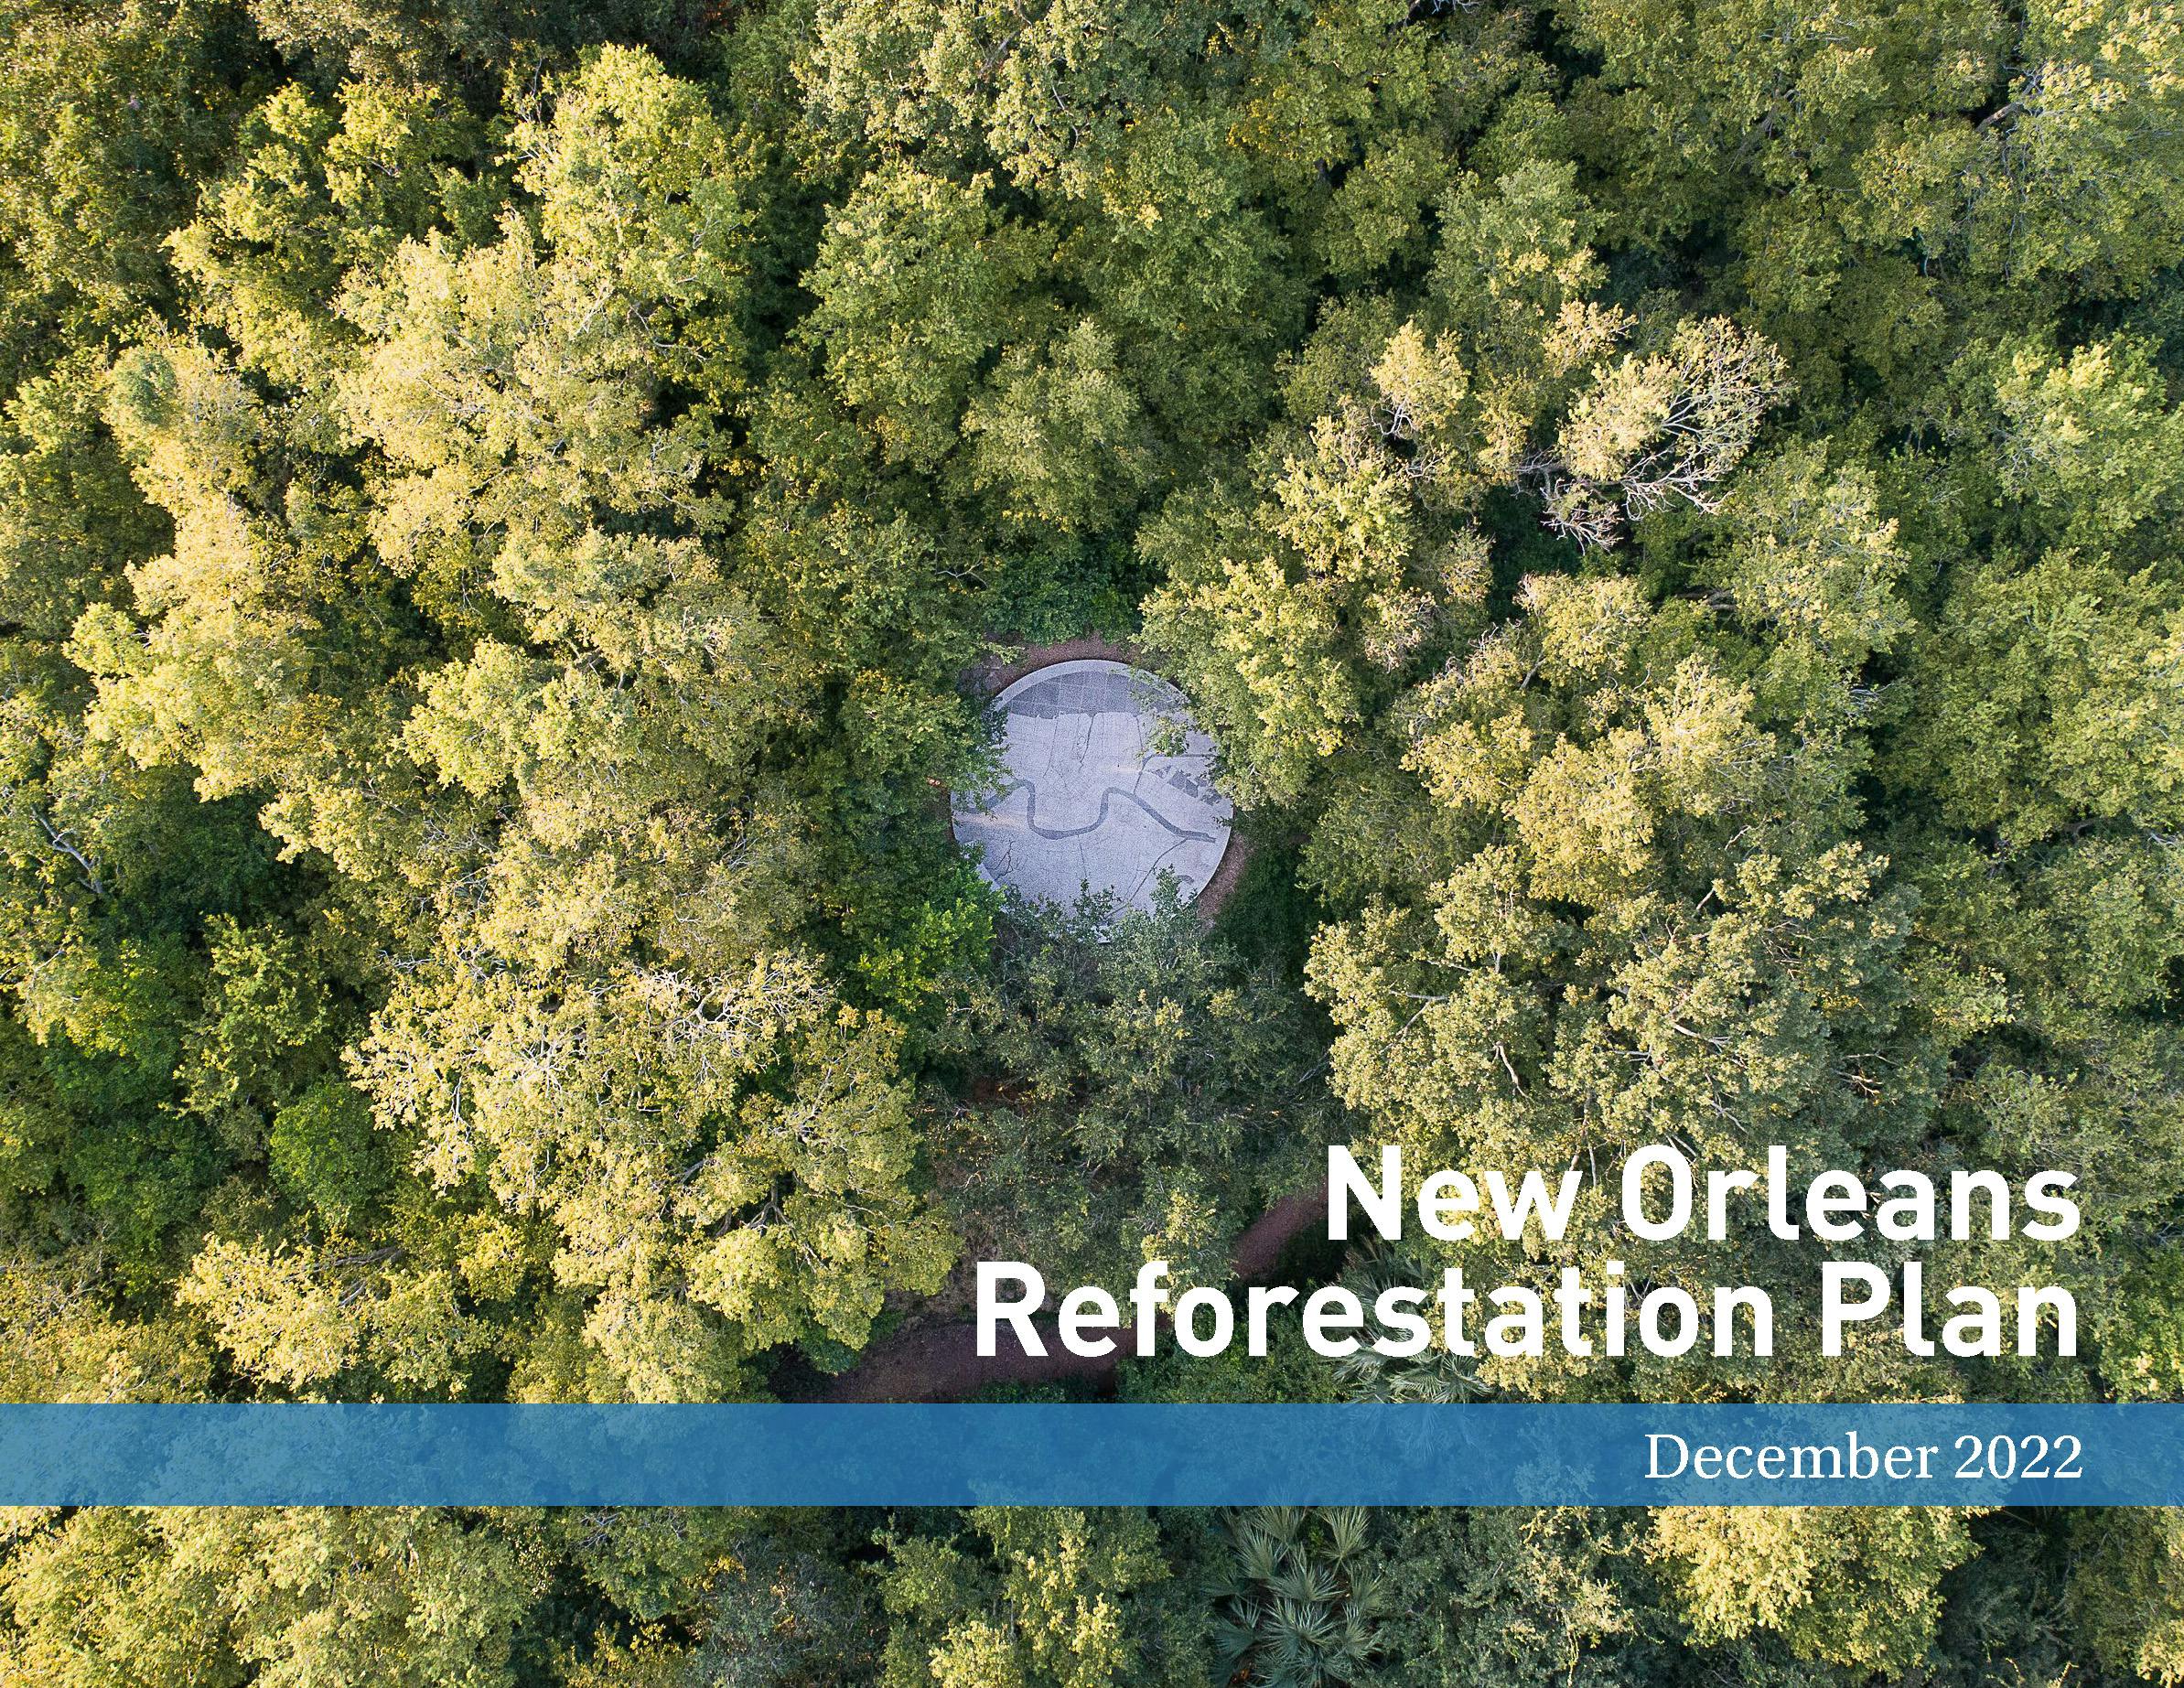 cover of new orleans reforestation plan report. Aerial photo of tree tops with grey stone deck in center